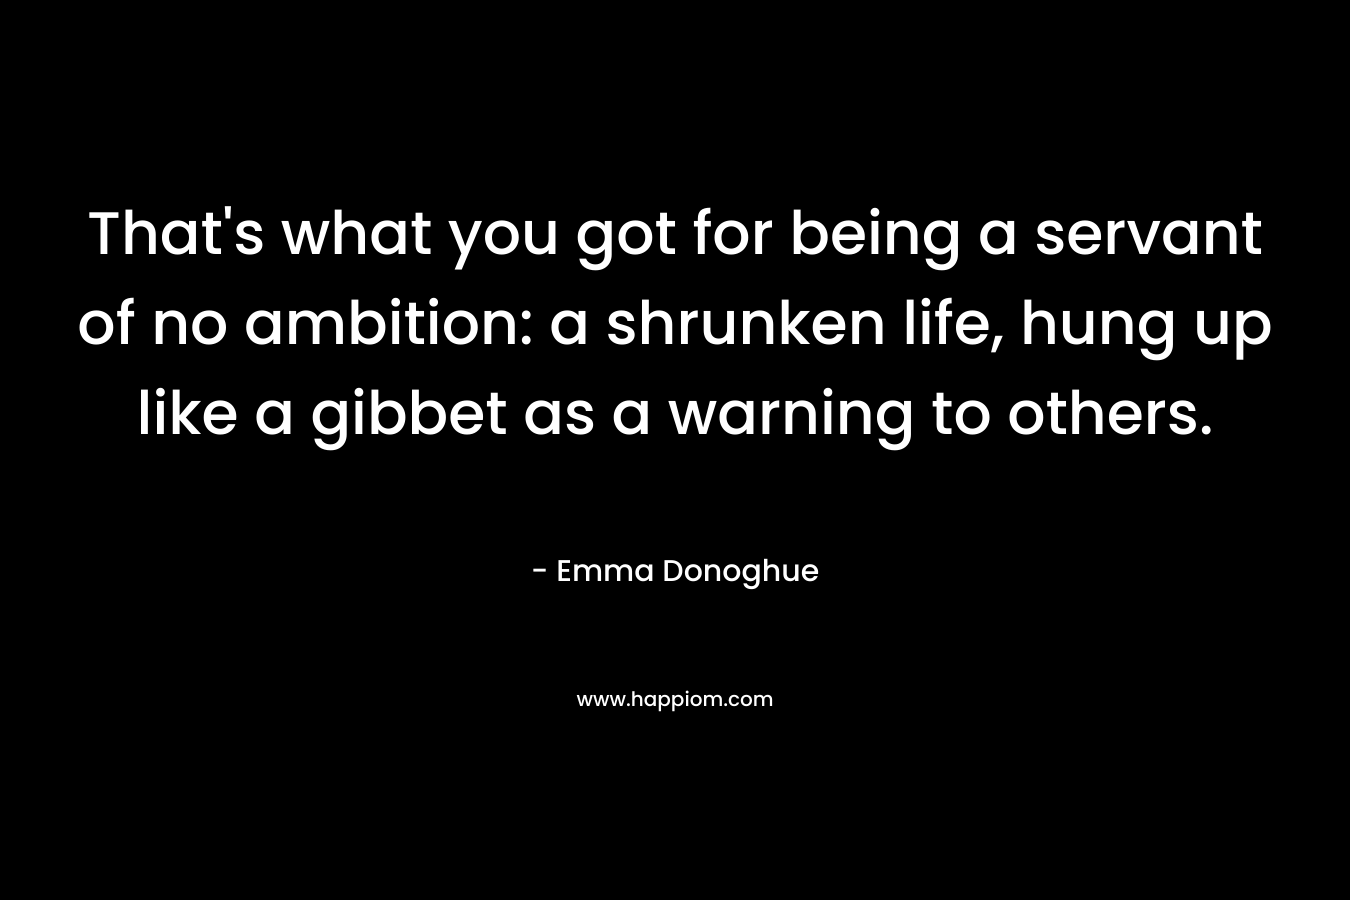 That’s what you got for being a servant of no ambition: a shrunken life, hung up like a gibbet as a warning to others. – Emma Donoghue